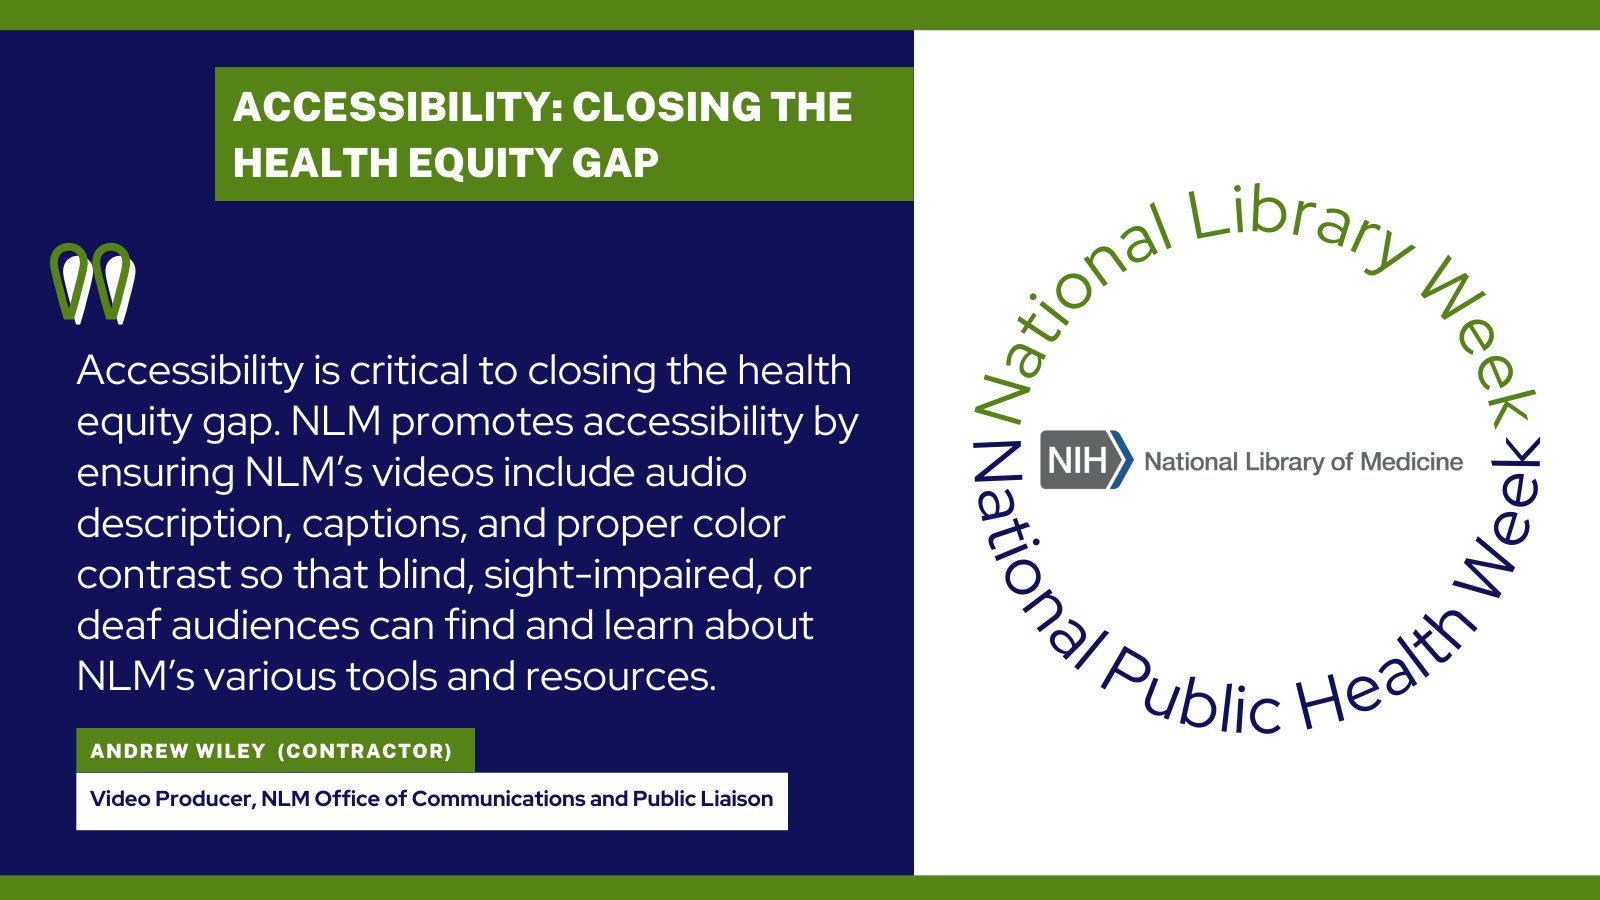 A quotation from Andrew Wiley, video producer in the NLM Office of Communications and Public Liaison, that says, "Accessibility is critical to closing the health equity gap. NLM promotes accessibility by ensuring NLM’s videos include audio description, captions, and proper color contrast so that blind, sight-impaired, or deaf audiences can find and learn about NLM’s various tools and resources."